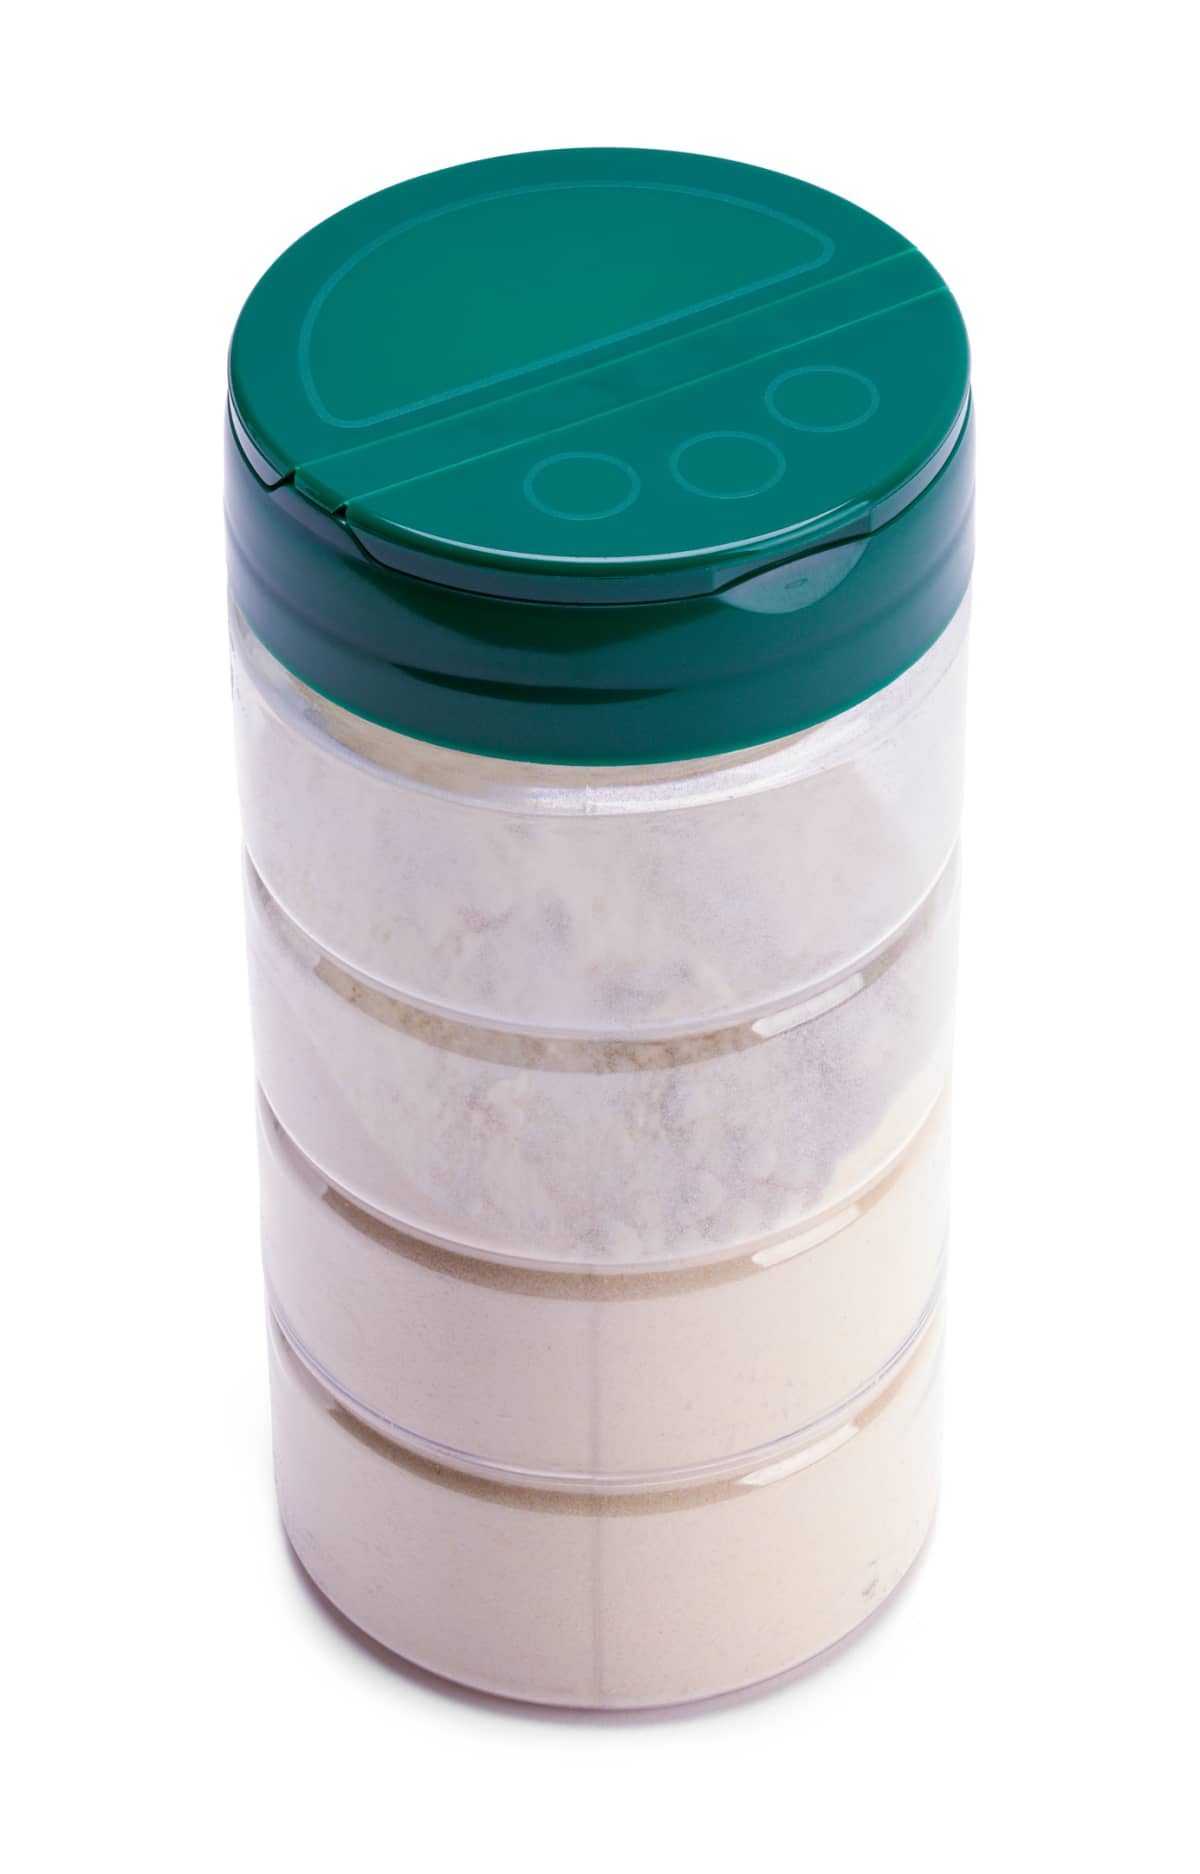 Plastic Container used for Parmesan Grated Cheese, with a green lid, on white background.